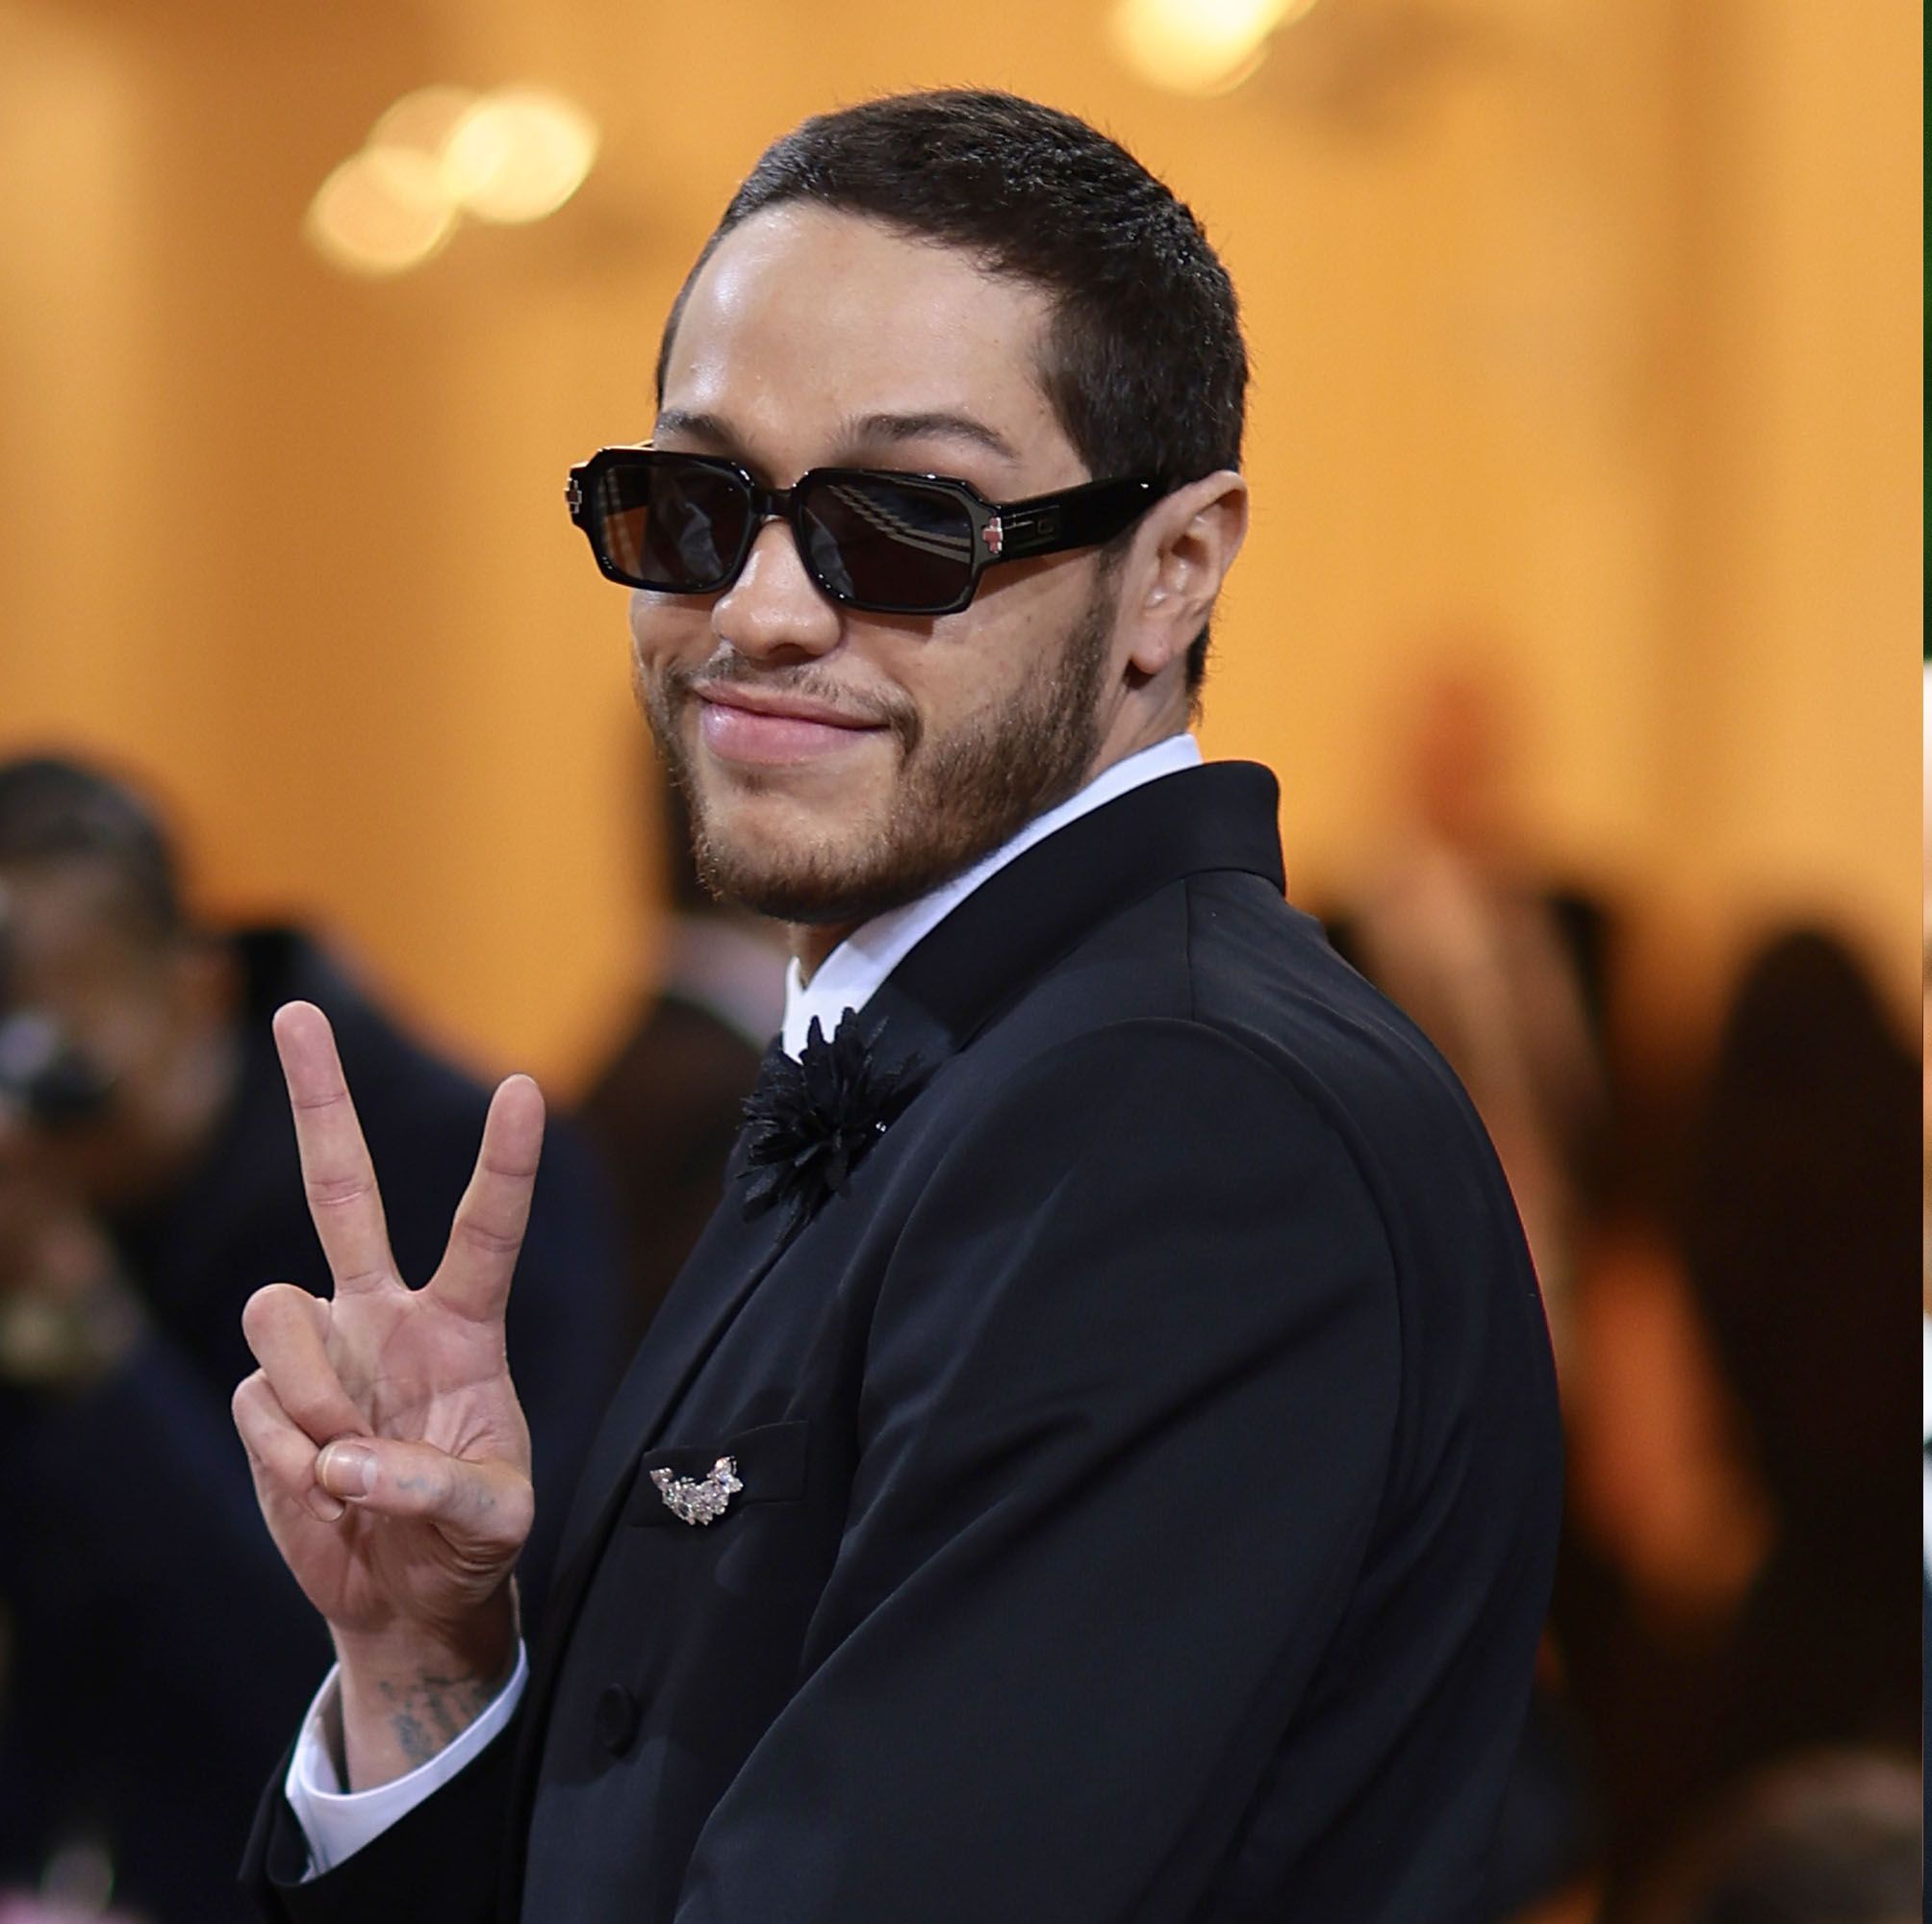 Pete Davidson's New BFF Orlando Bloom Has Apparently Been Giving Him Breakup Advice